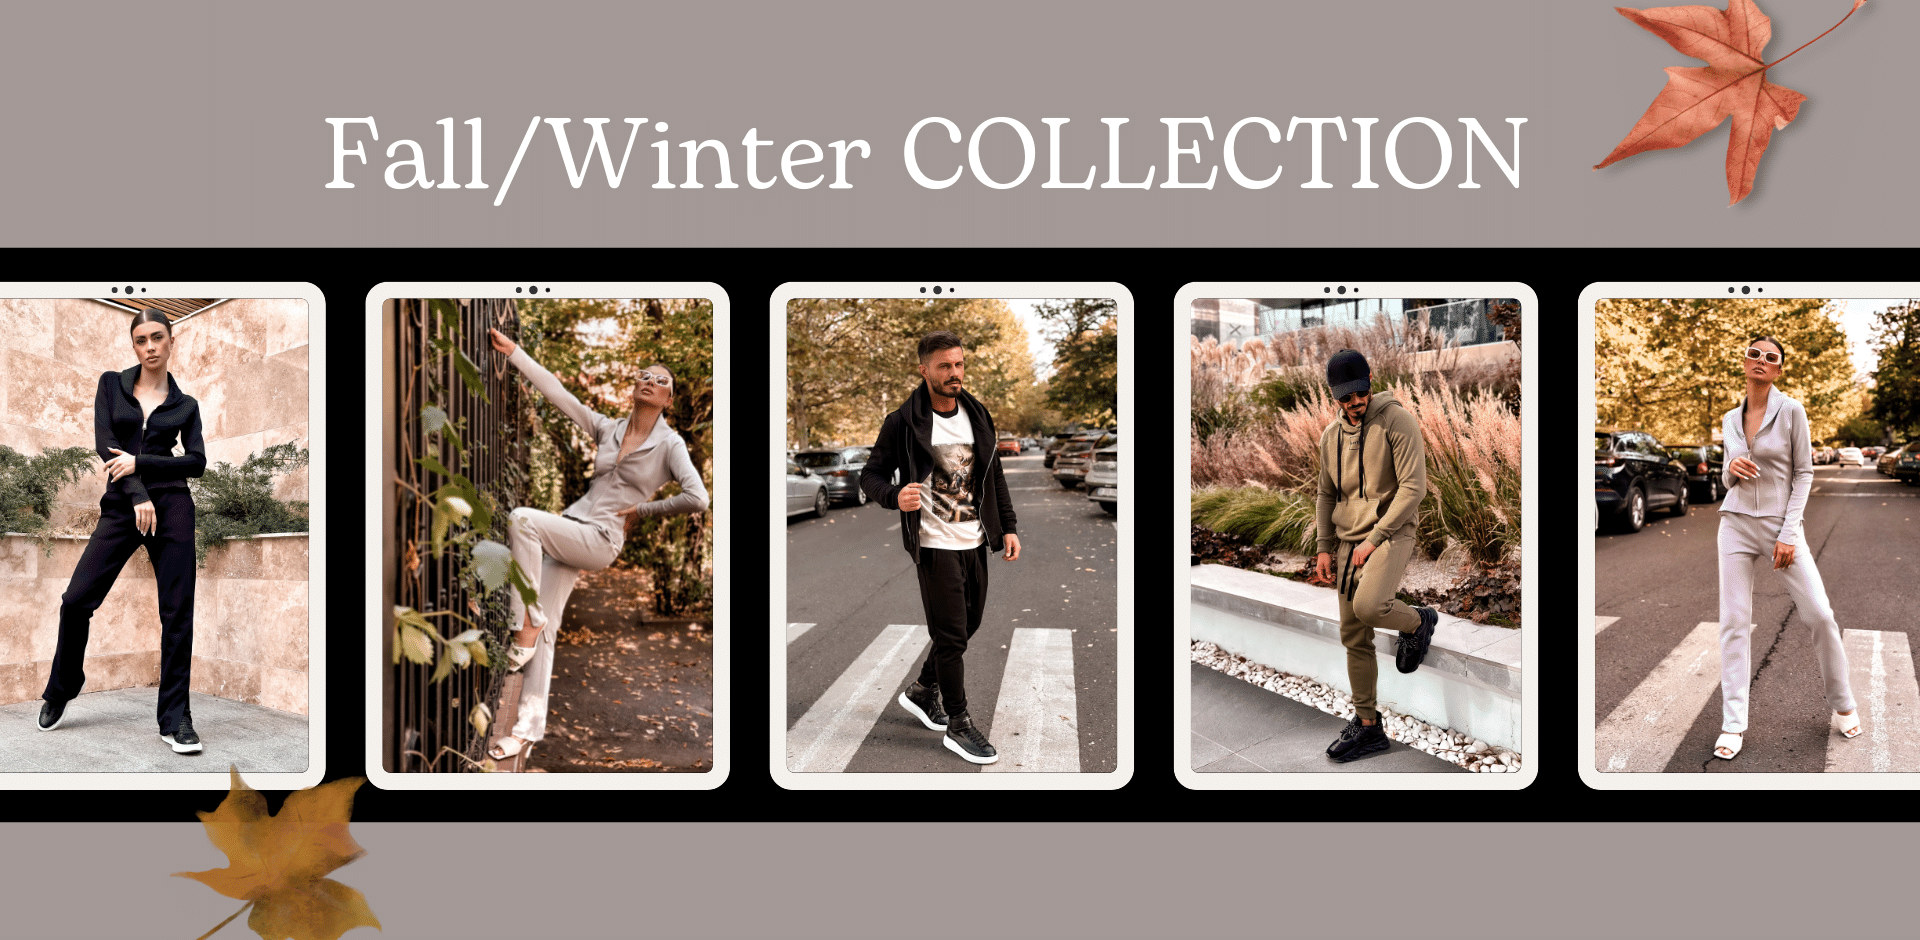 Fall/Winter Collection